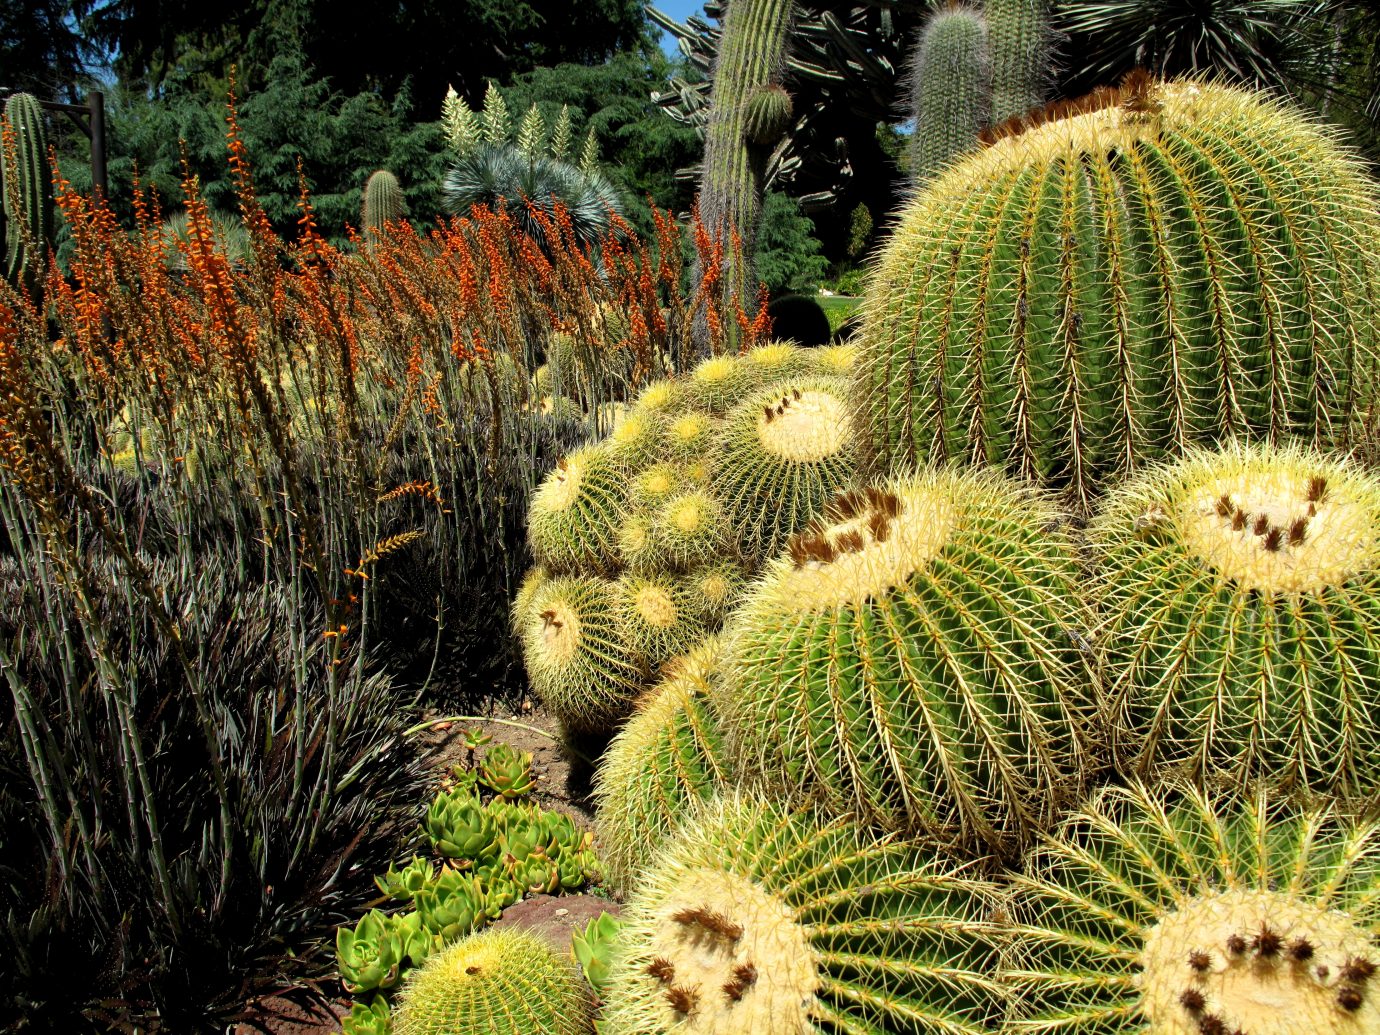 A garden of Cacti at The Huntington Library